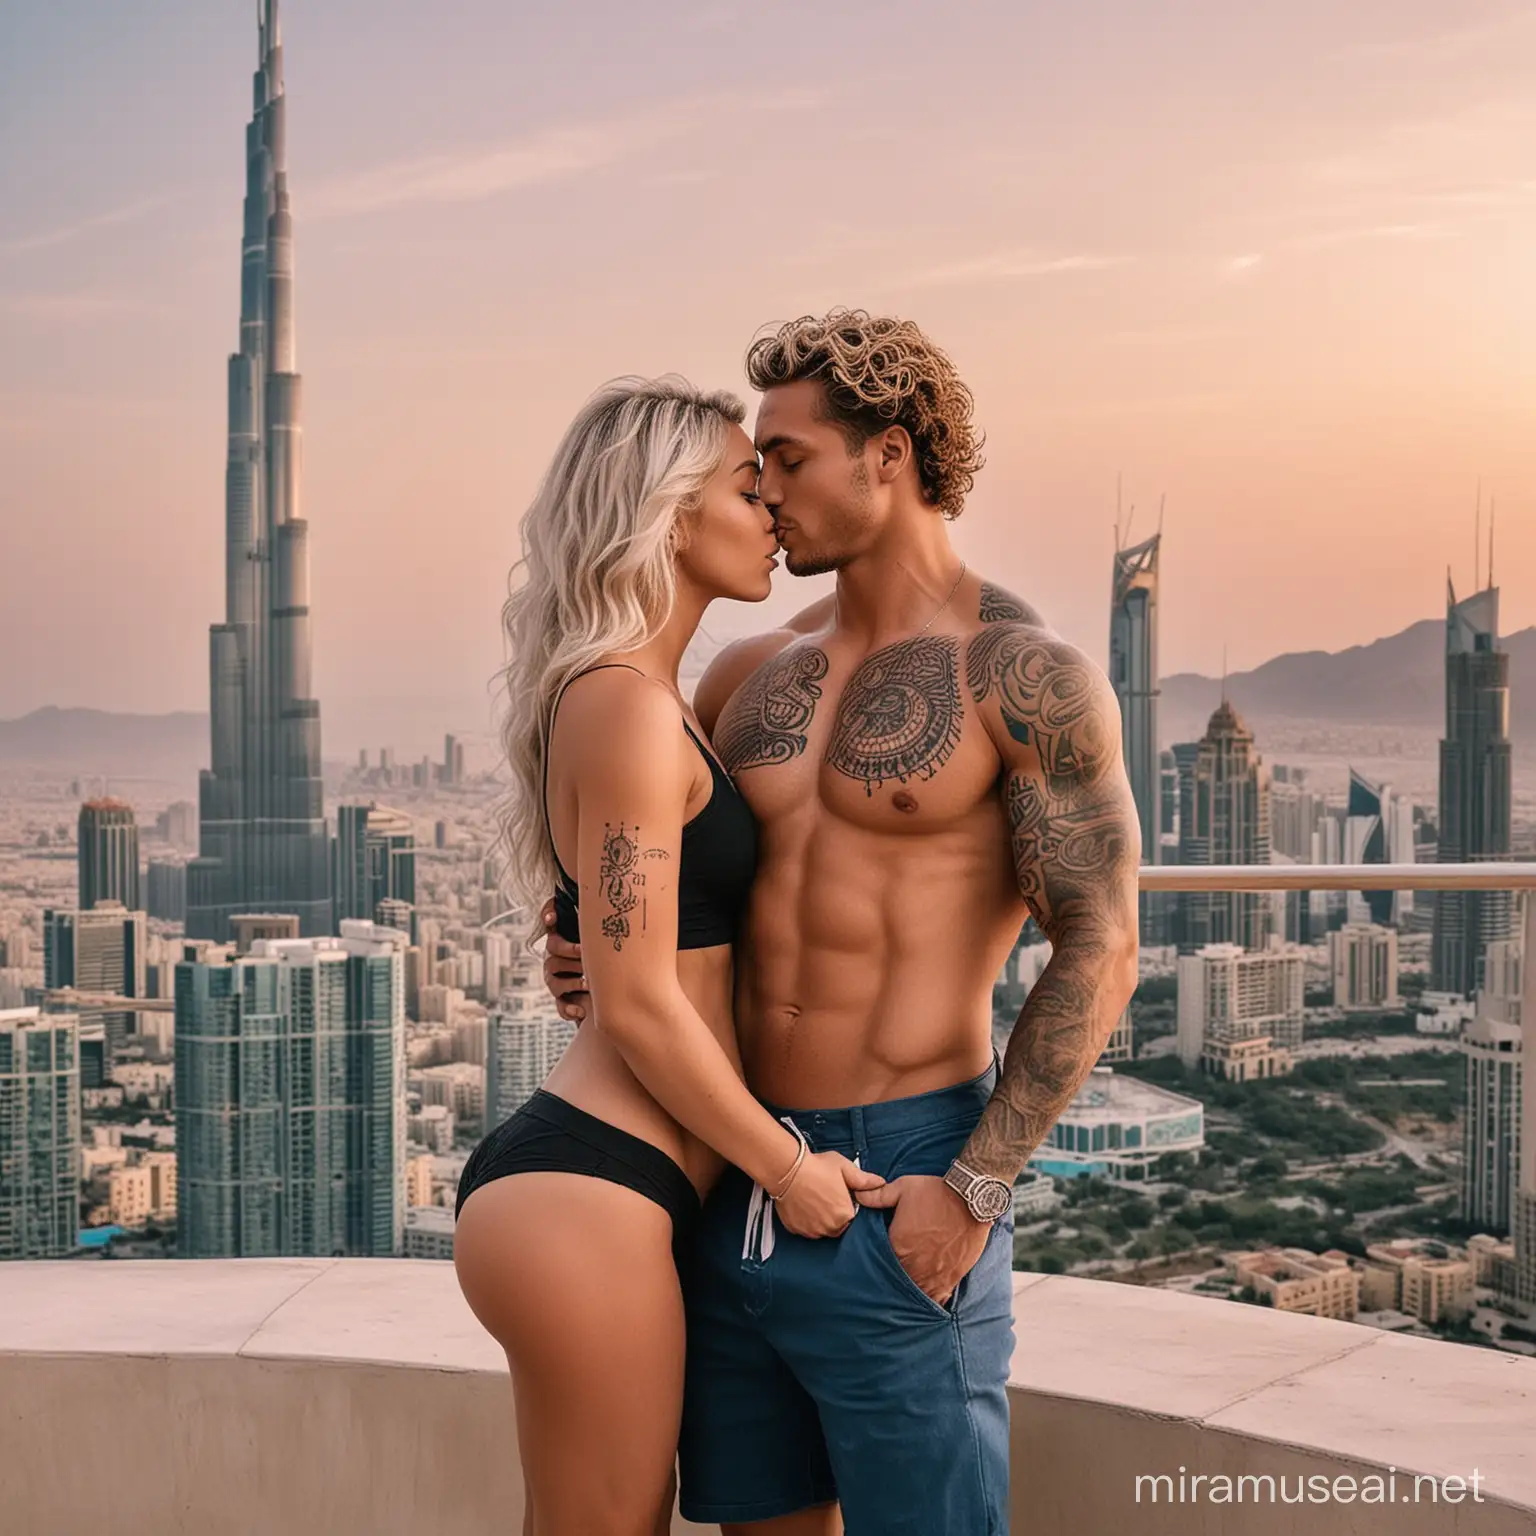 Muscular Football Player and Pregnant Princess Kissing by Luxury Villa with Skyscraper View